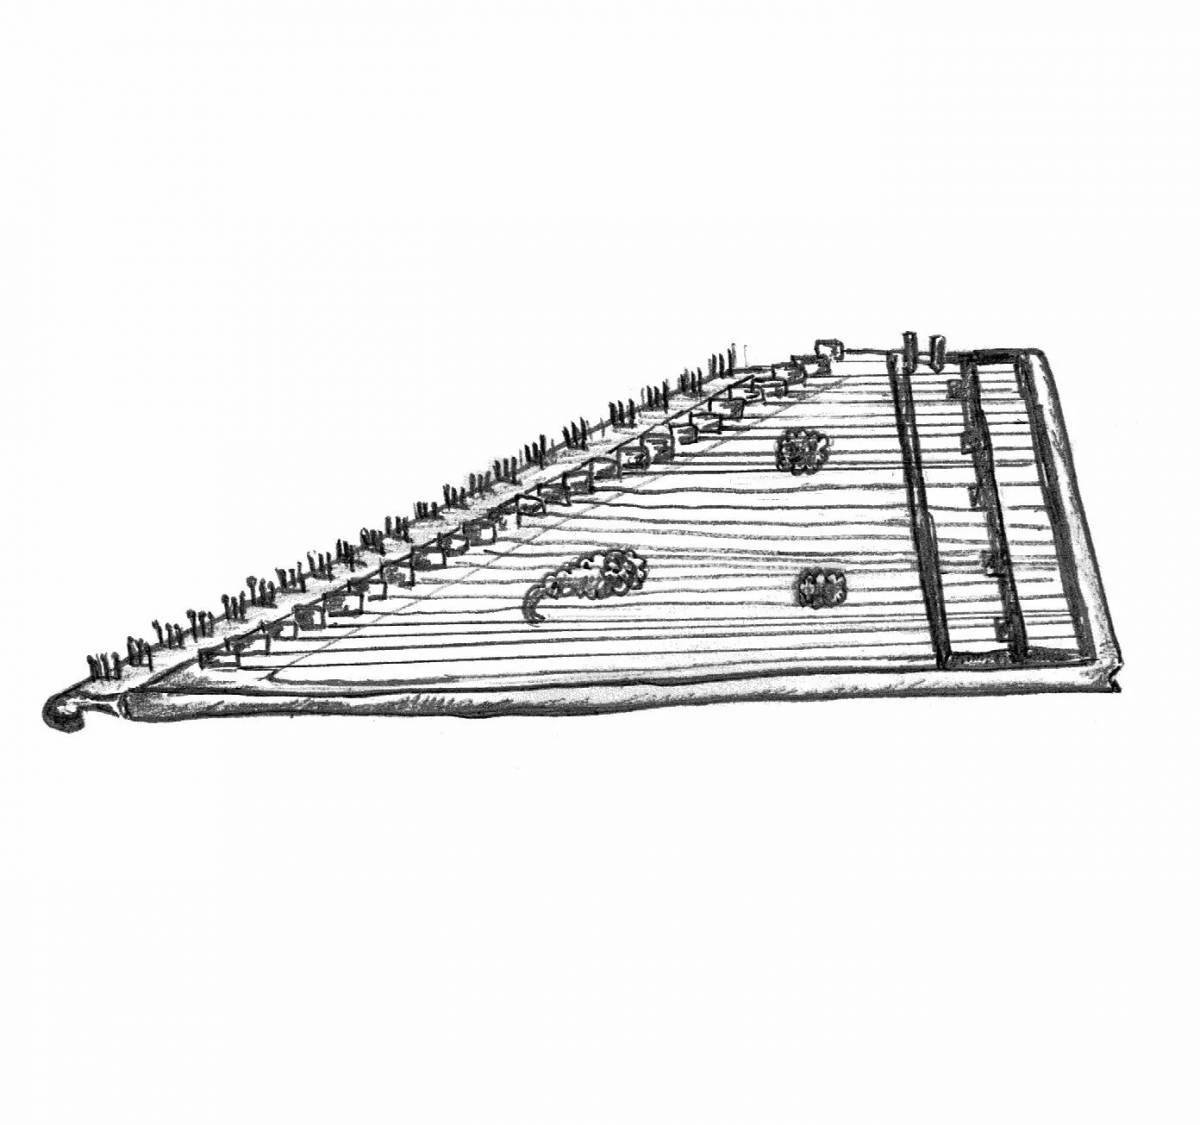 Delightful drawing of a harp